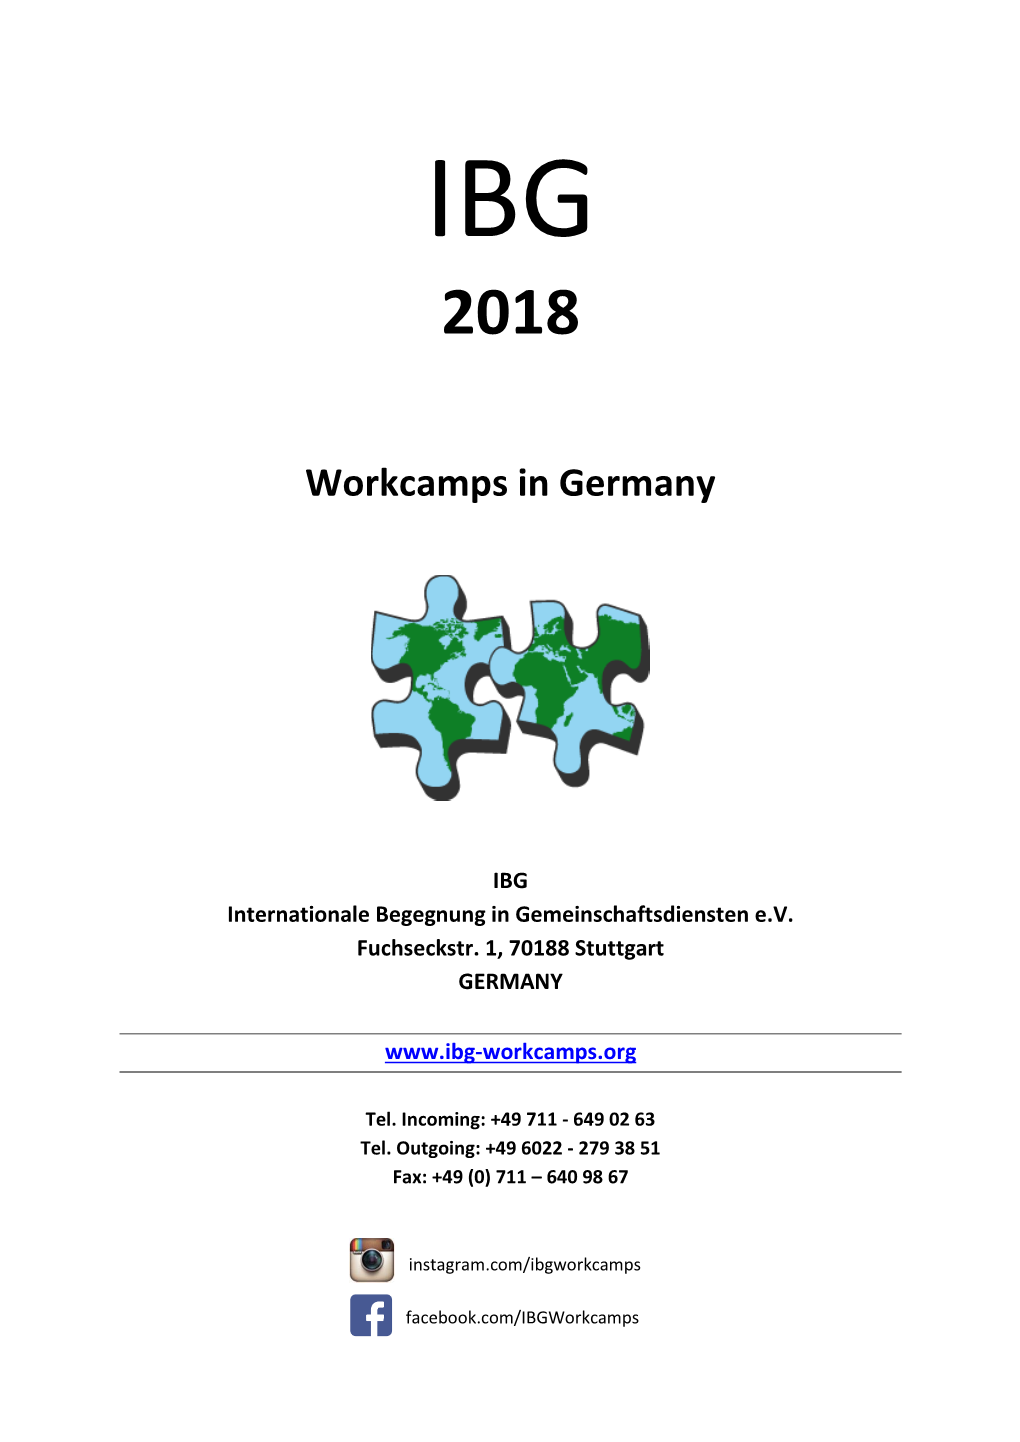 Workcamps in Germany